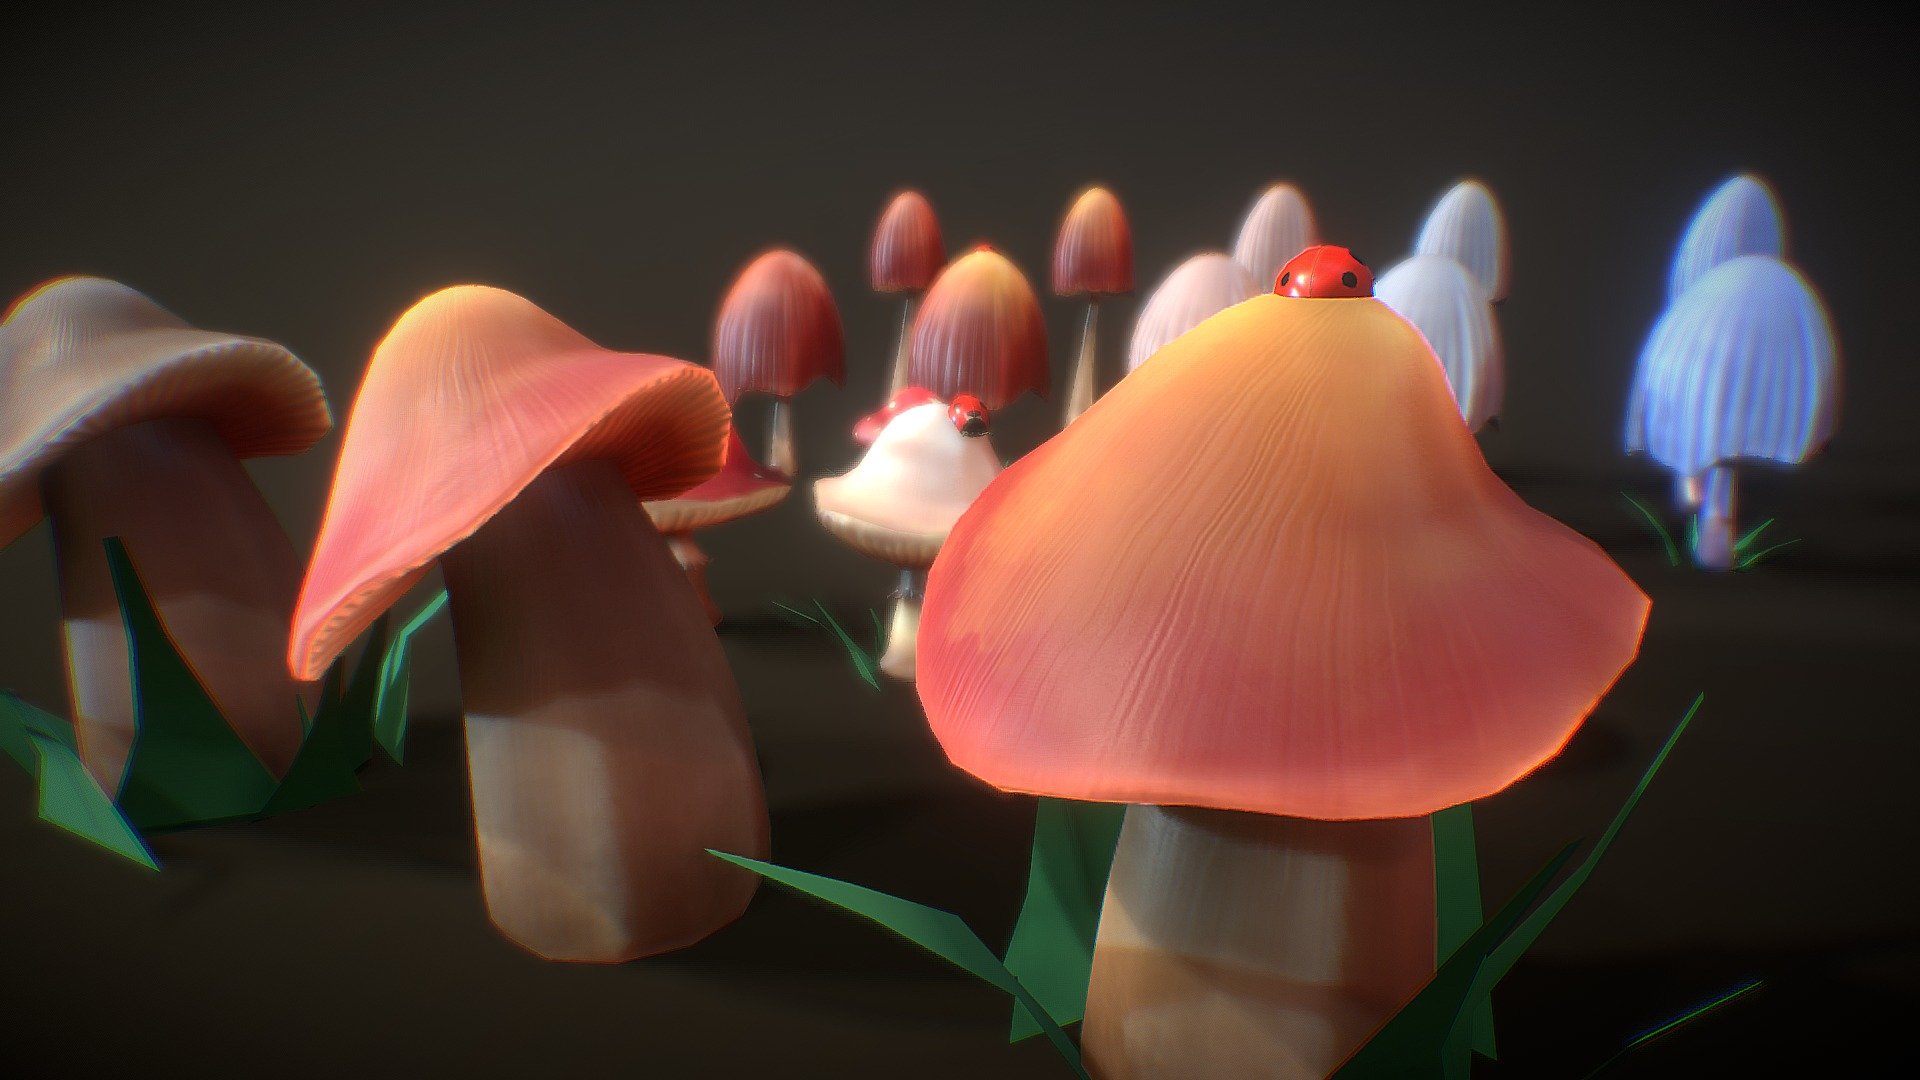 Set of 5 different mid poly mushrooms  with 8 pbr textures, grass and ladybug.
Inspired by amazing 2D concept art of https://graphicriver.net/item/mushroom-set/9343107
I hope you will like it!
(Btw, I can share you *.spp file for each mushroom if you need it) - Cartoon Mushroom pack with ladybug - 3D model by Sergey Egelsky (@egelsky) 3d model